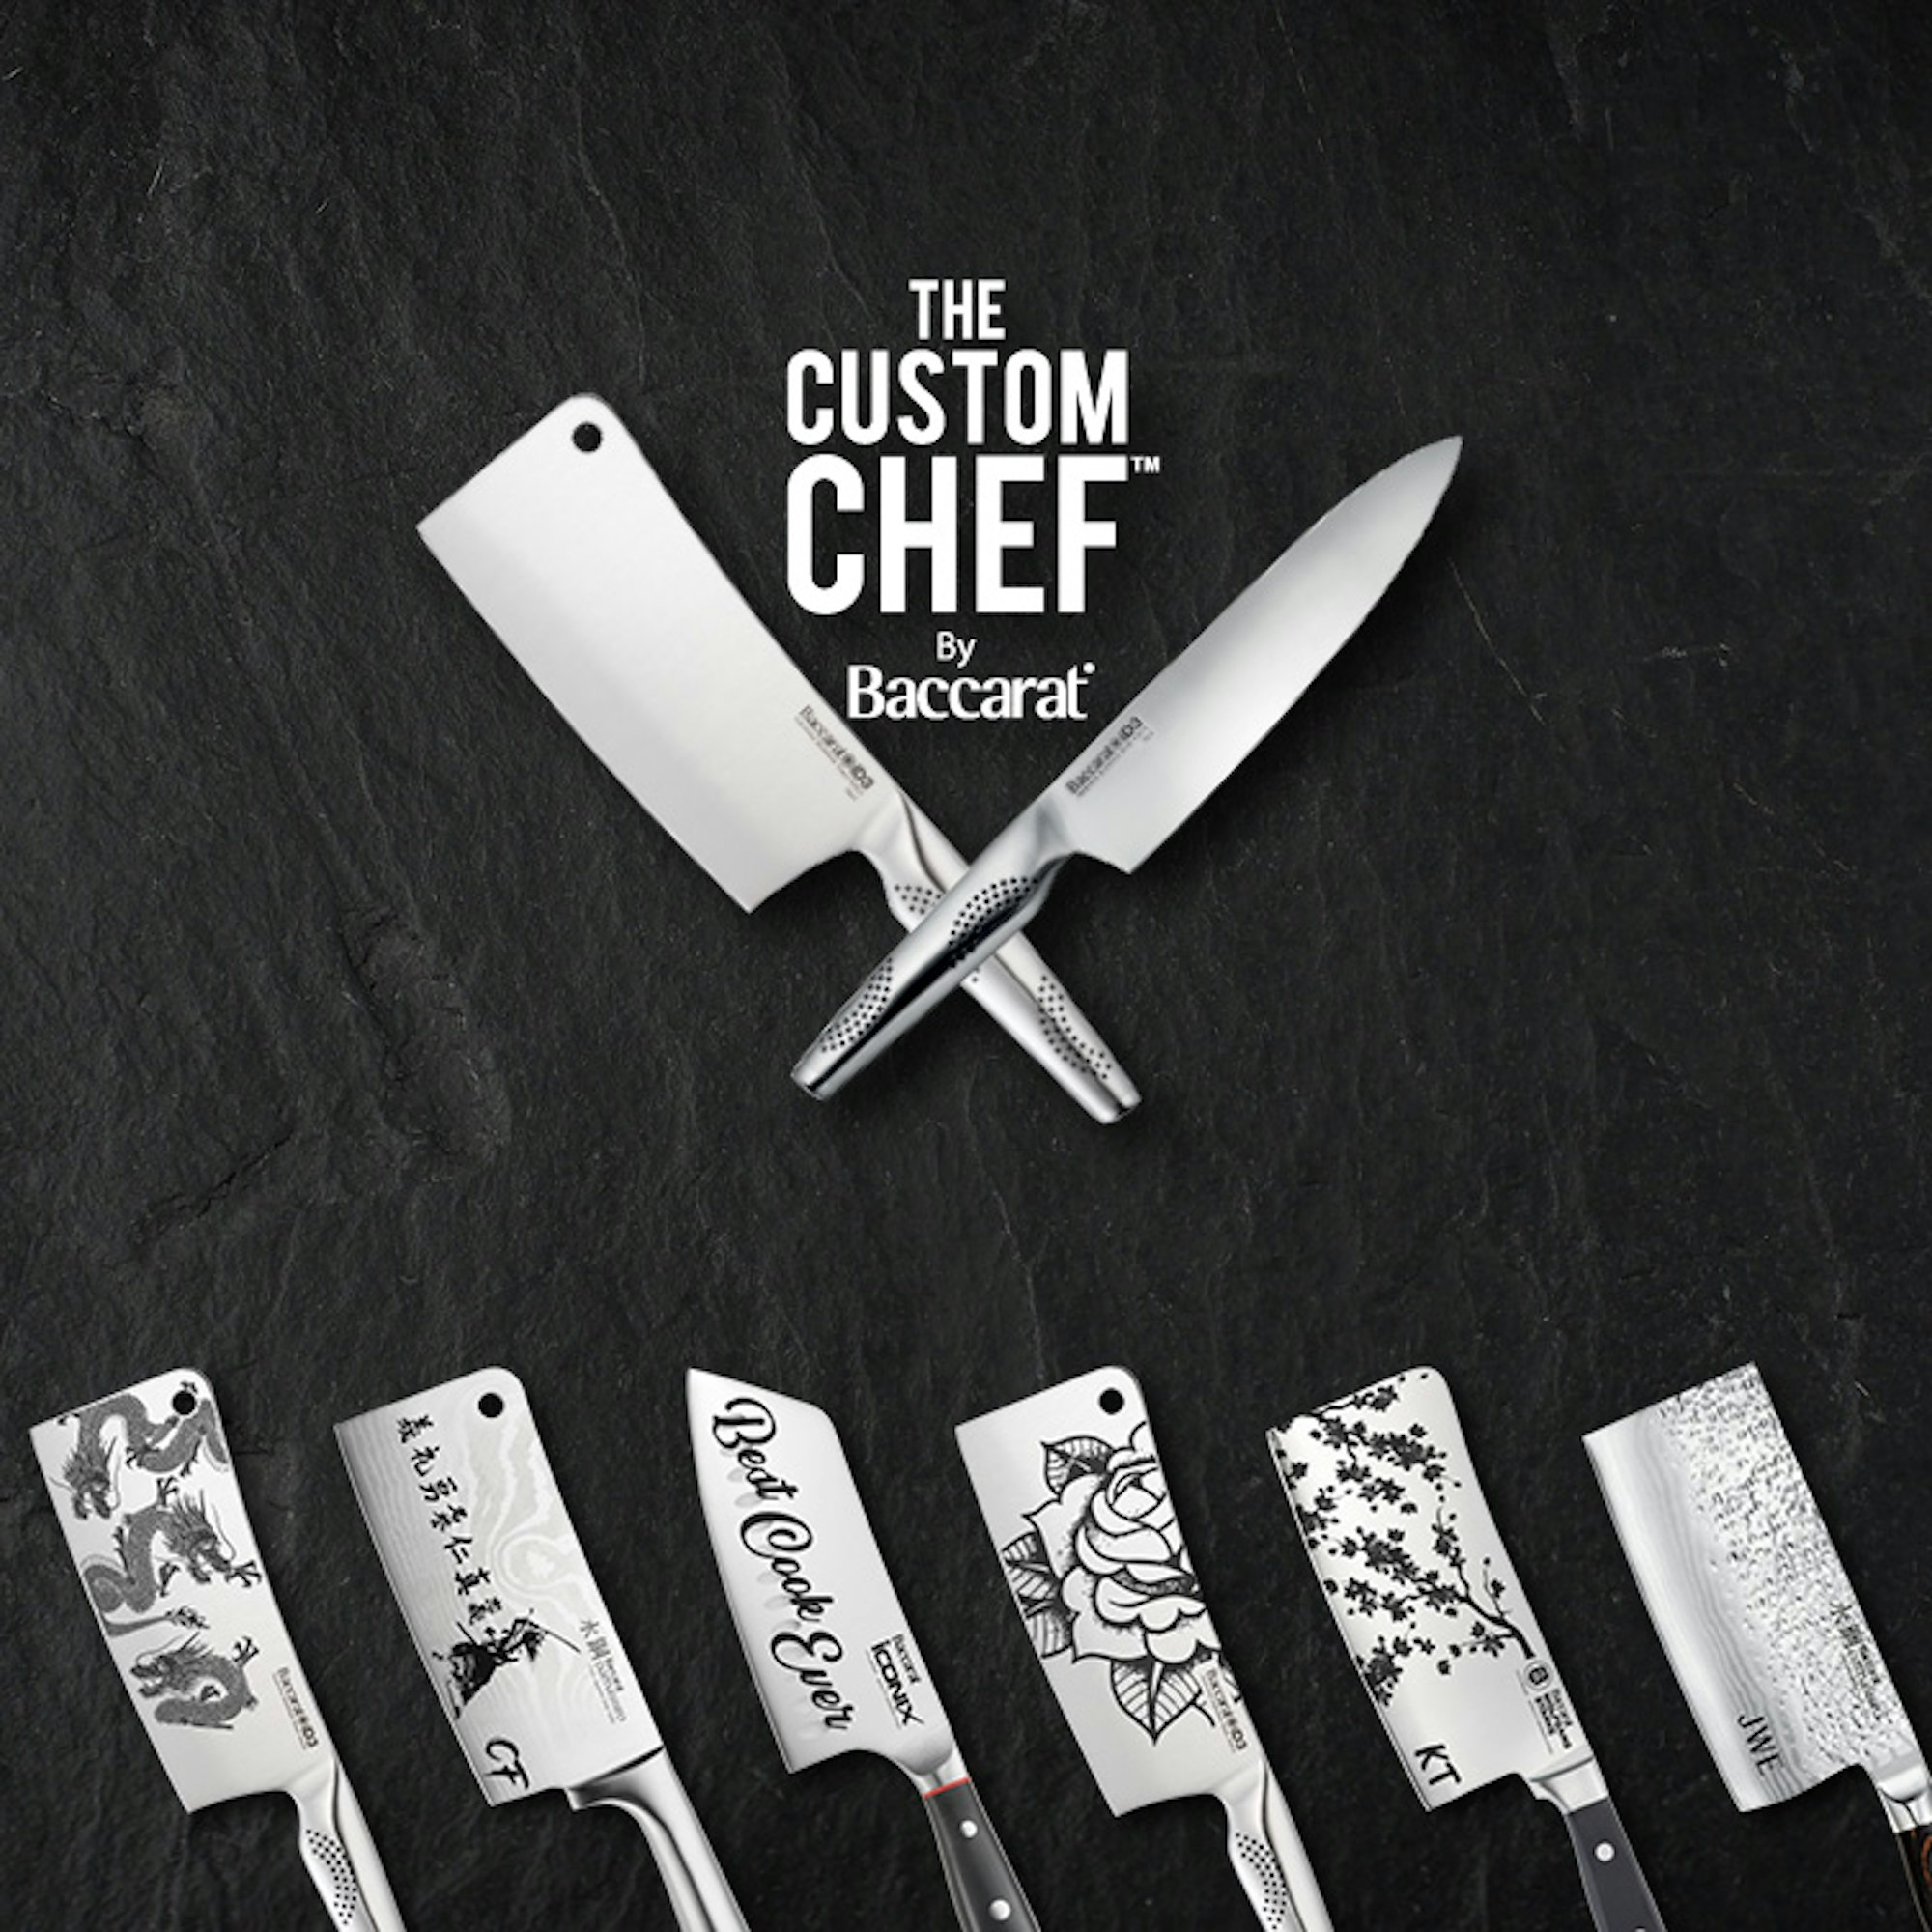 THE CUSTOM CHEF COLLECTION BY BACCARAT